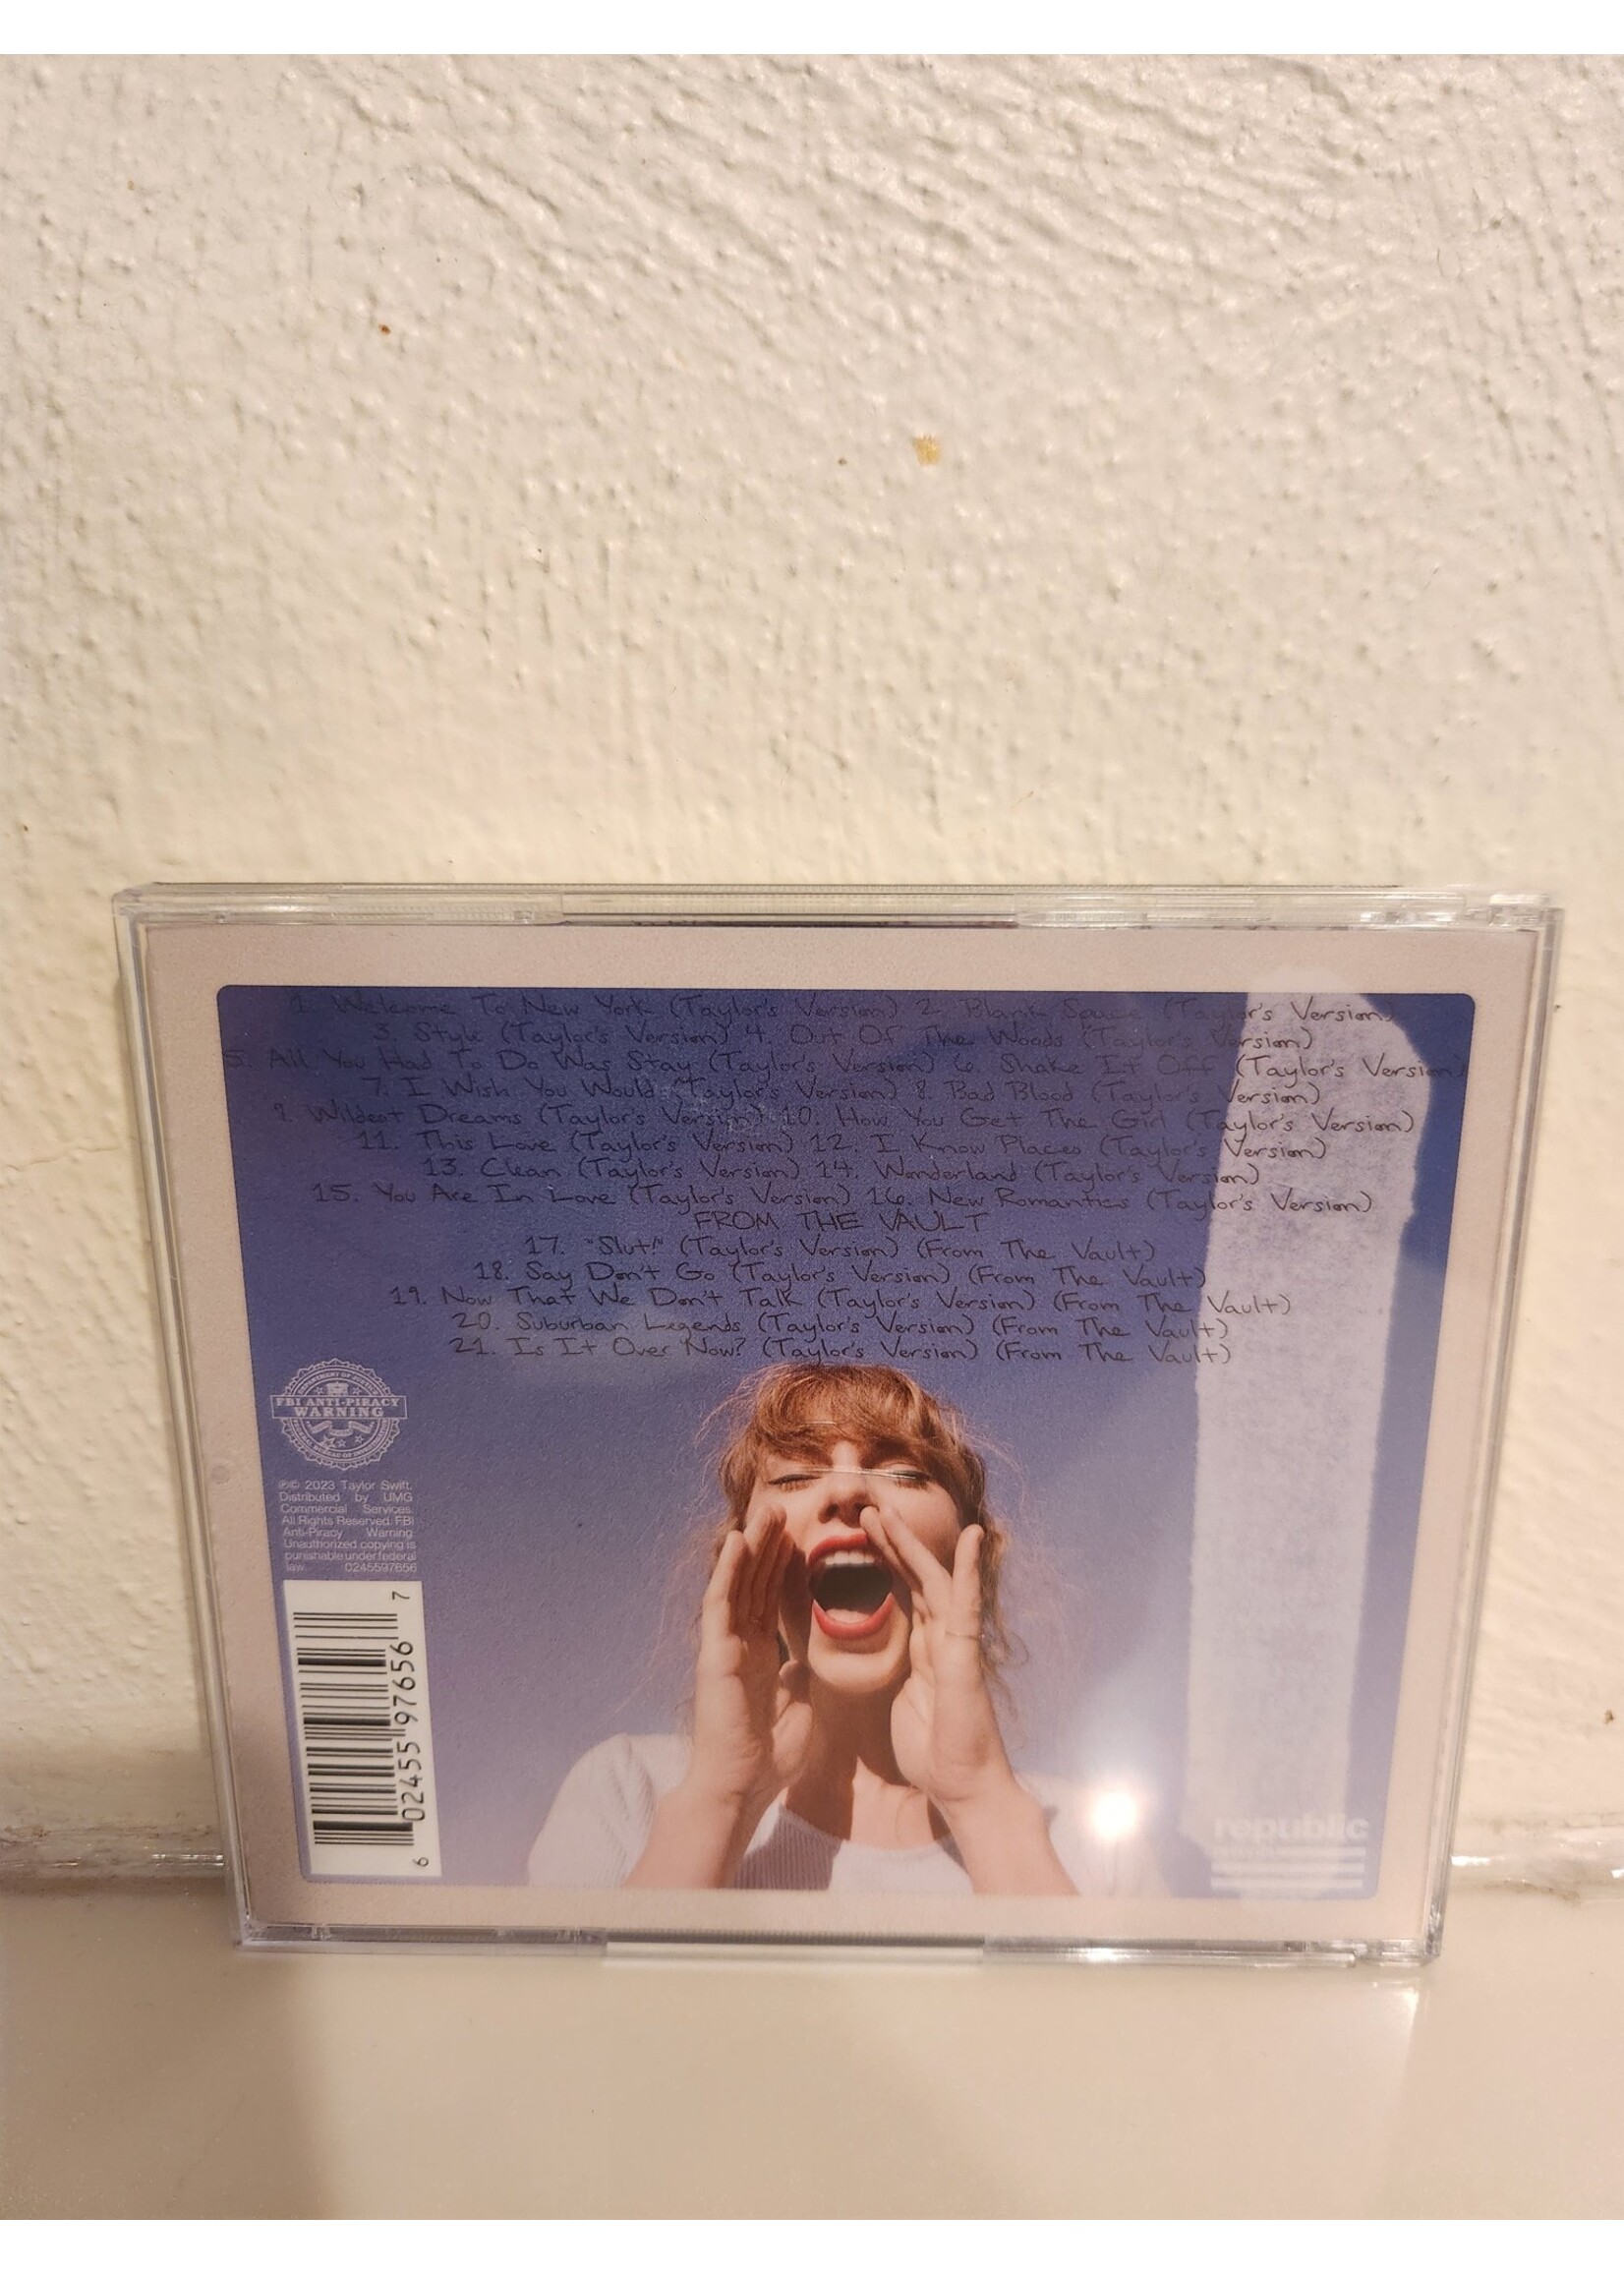 *Open* Taylor Swift - 1989 (Taylor's Version) CD Crystal Skies Blue Deluxe Poster Edition (Target Exclusive)